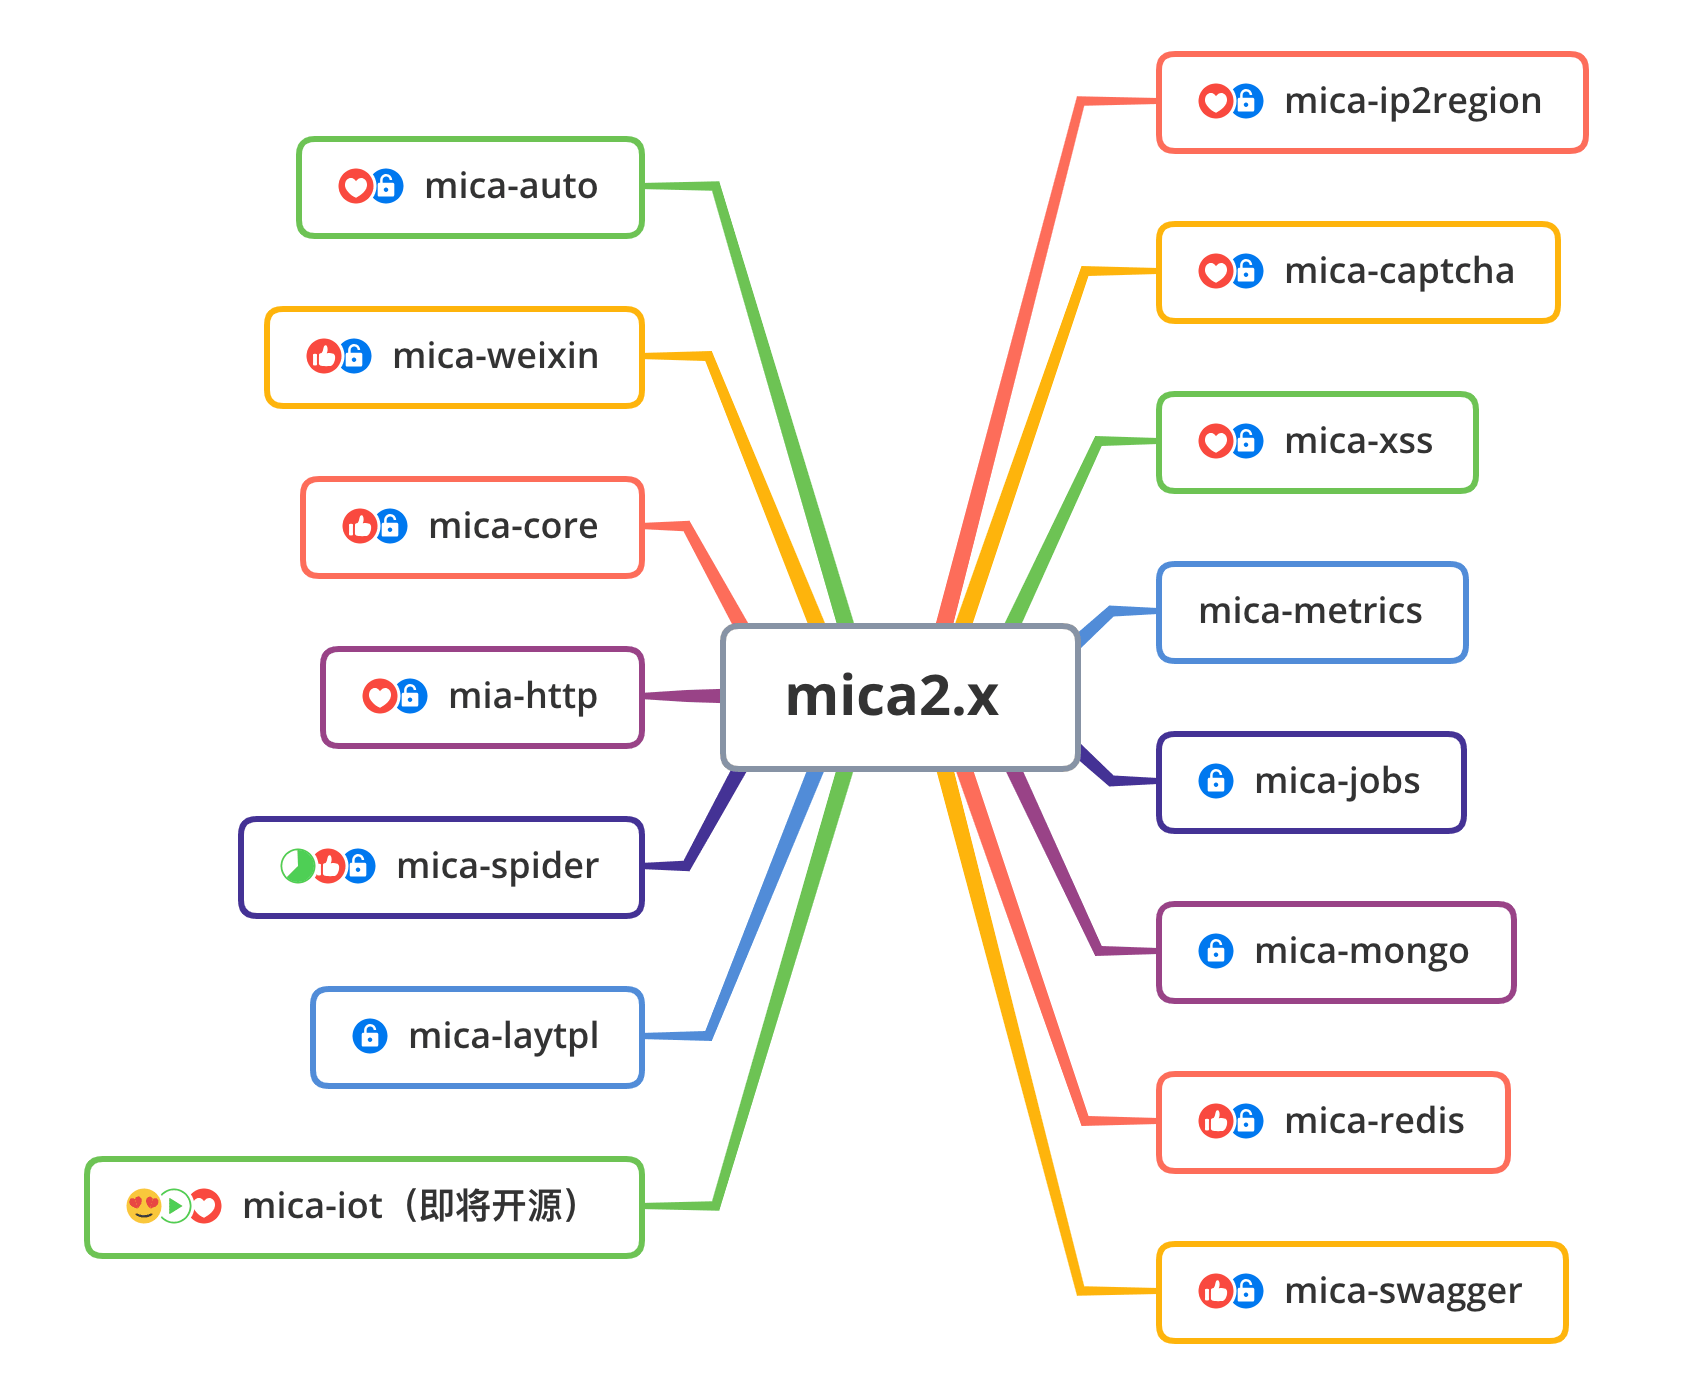 mica2.x-open.png